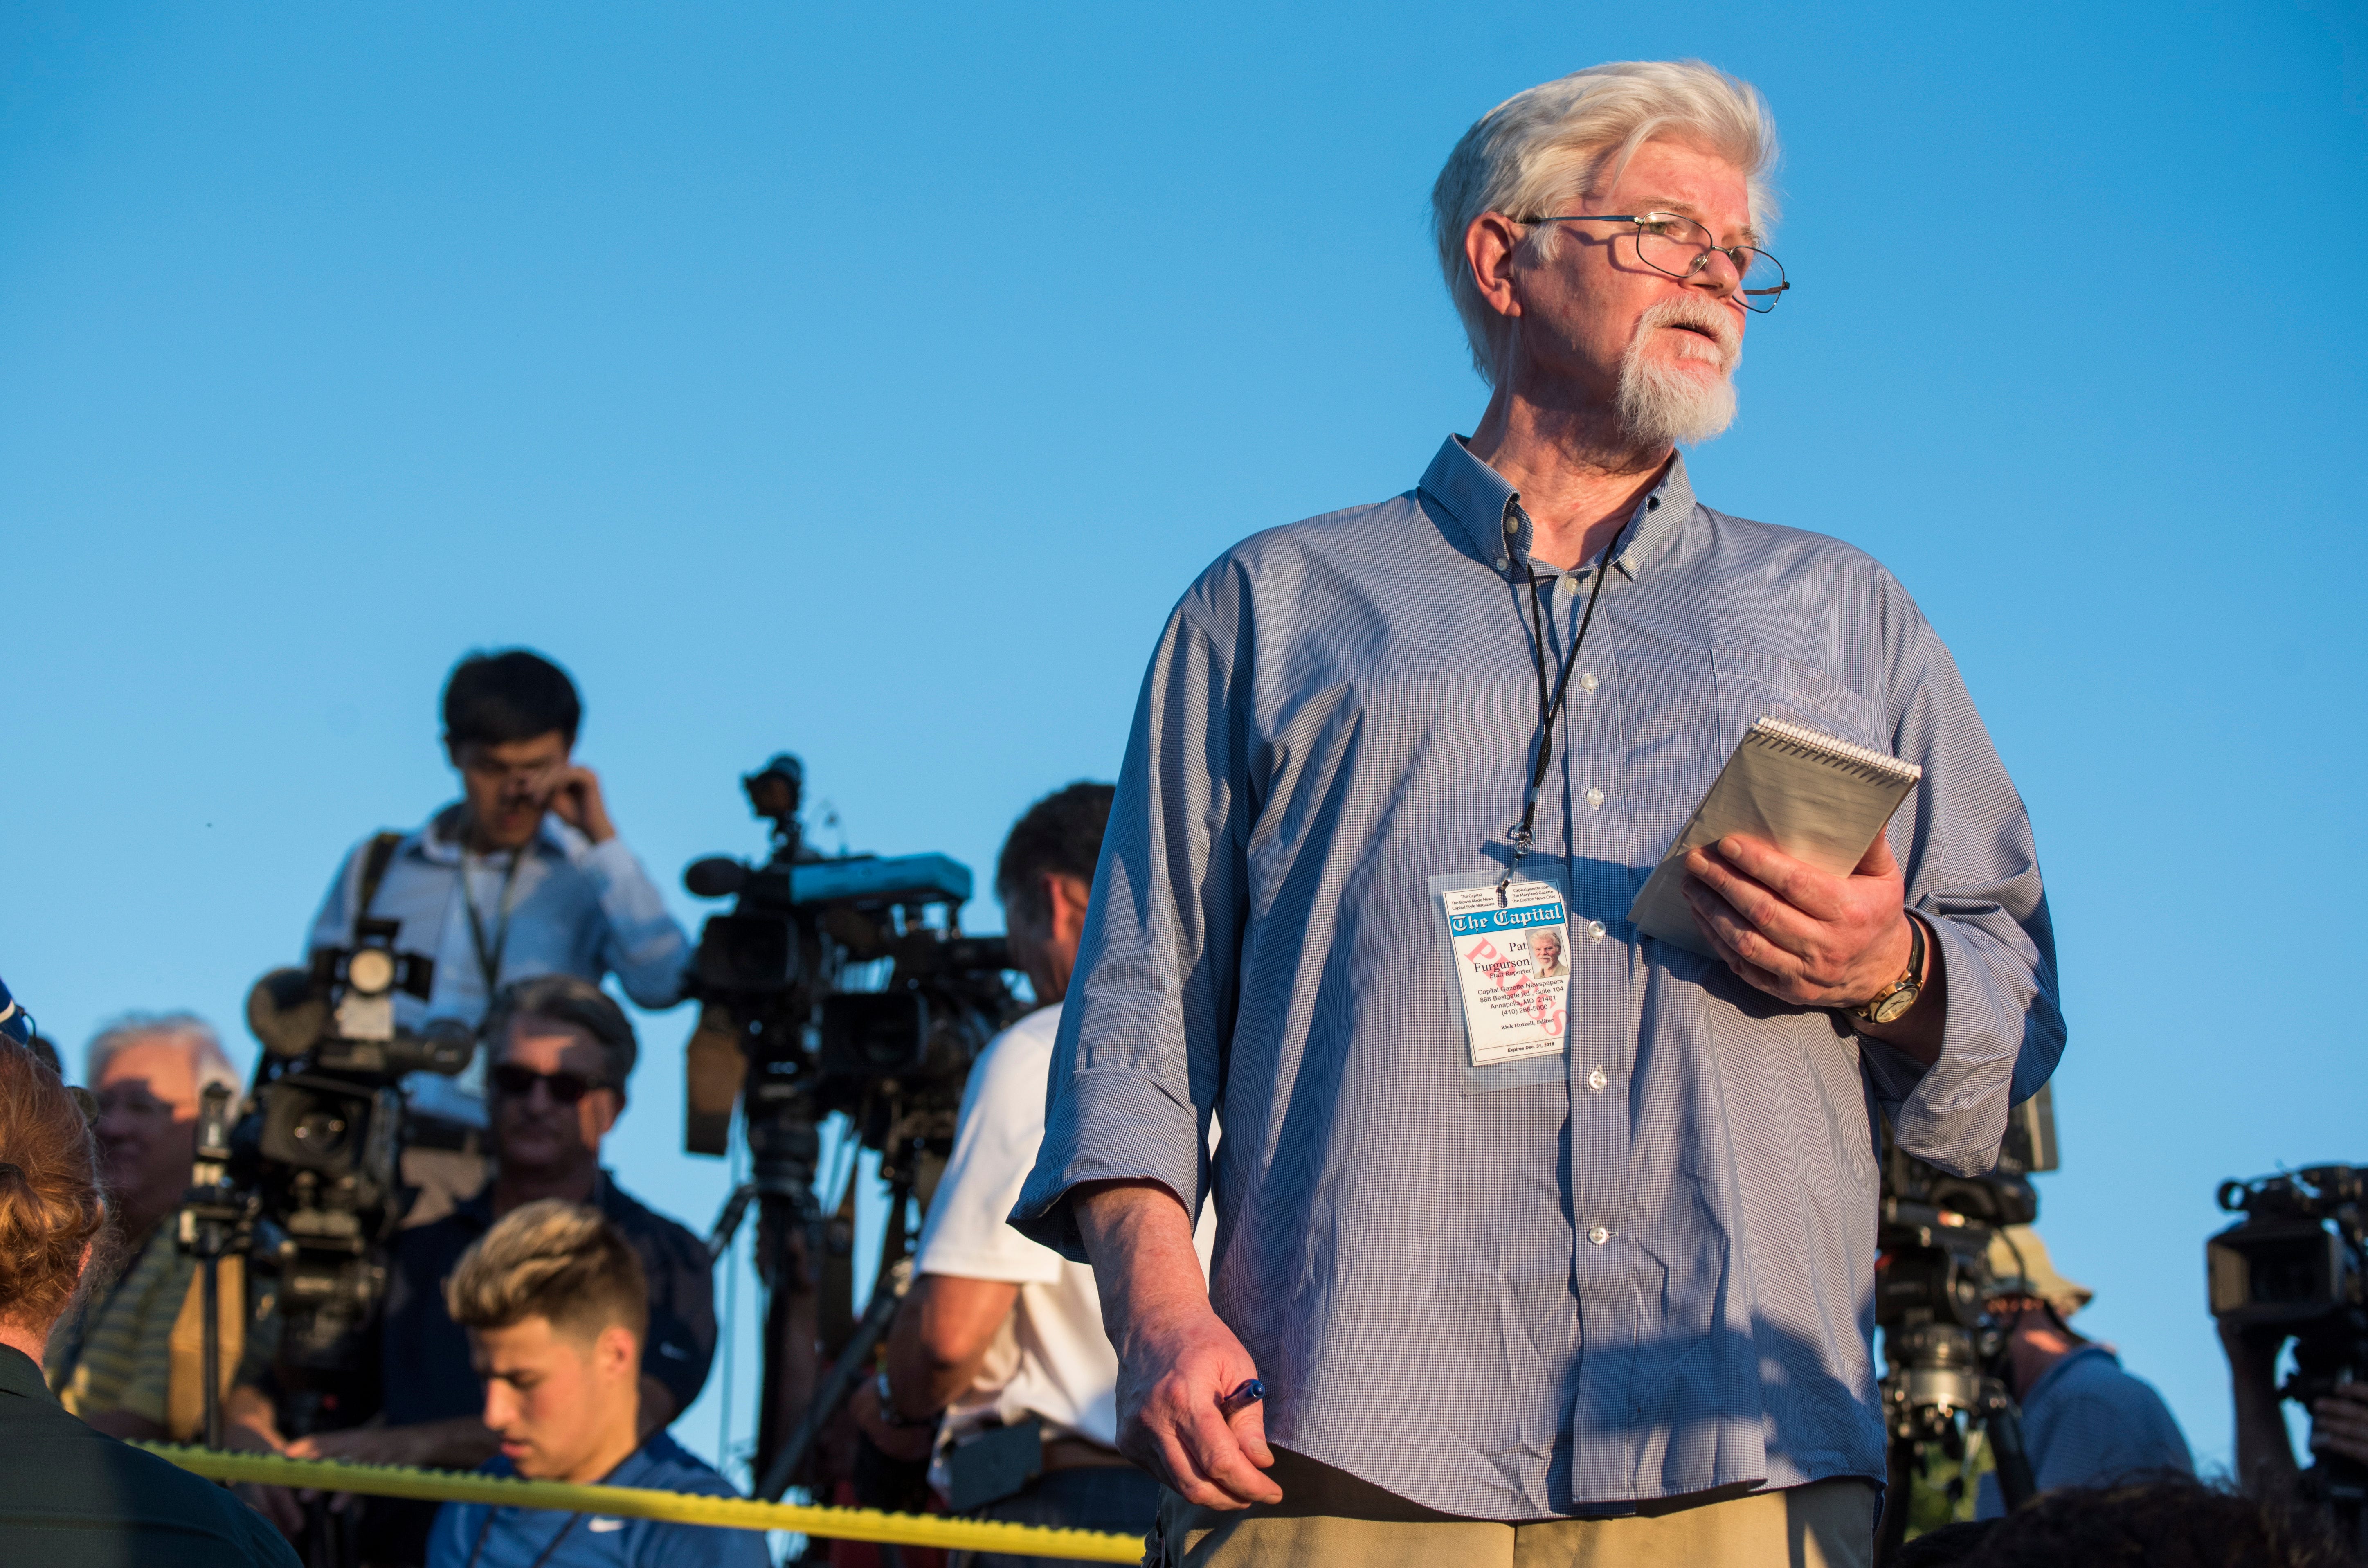 Pat Furgurson, staff reporter of the Capital Gazette, reports outside the scene of a shooting at the Capital Gazette building in Annapolis, Md., on June 28, 2018. Five newspaper employees were killed and several injured in the shooting.